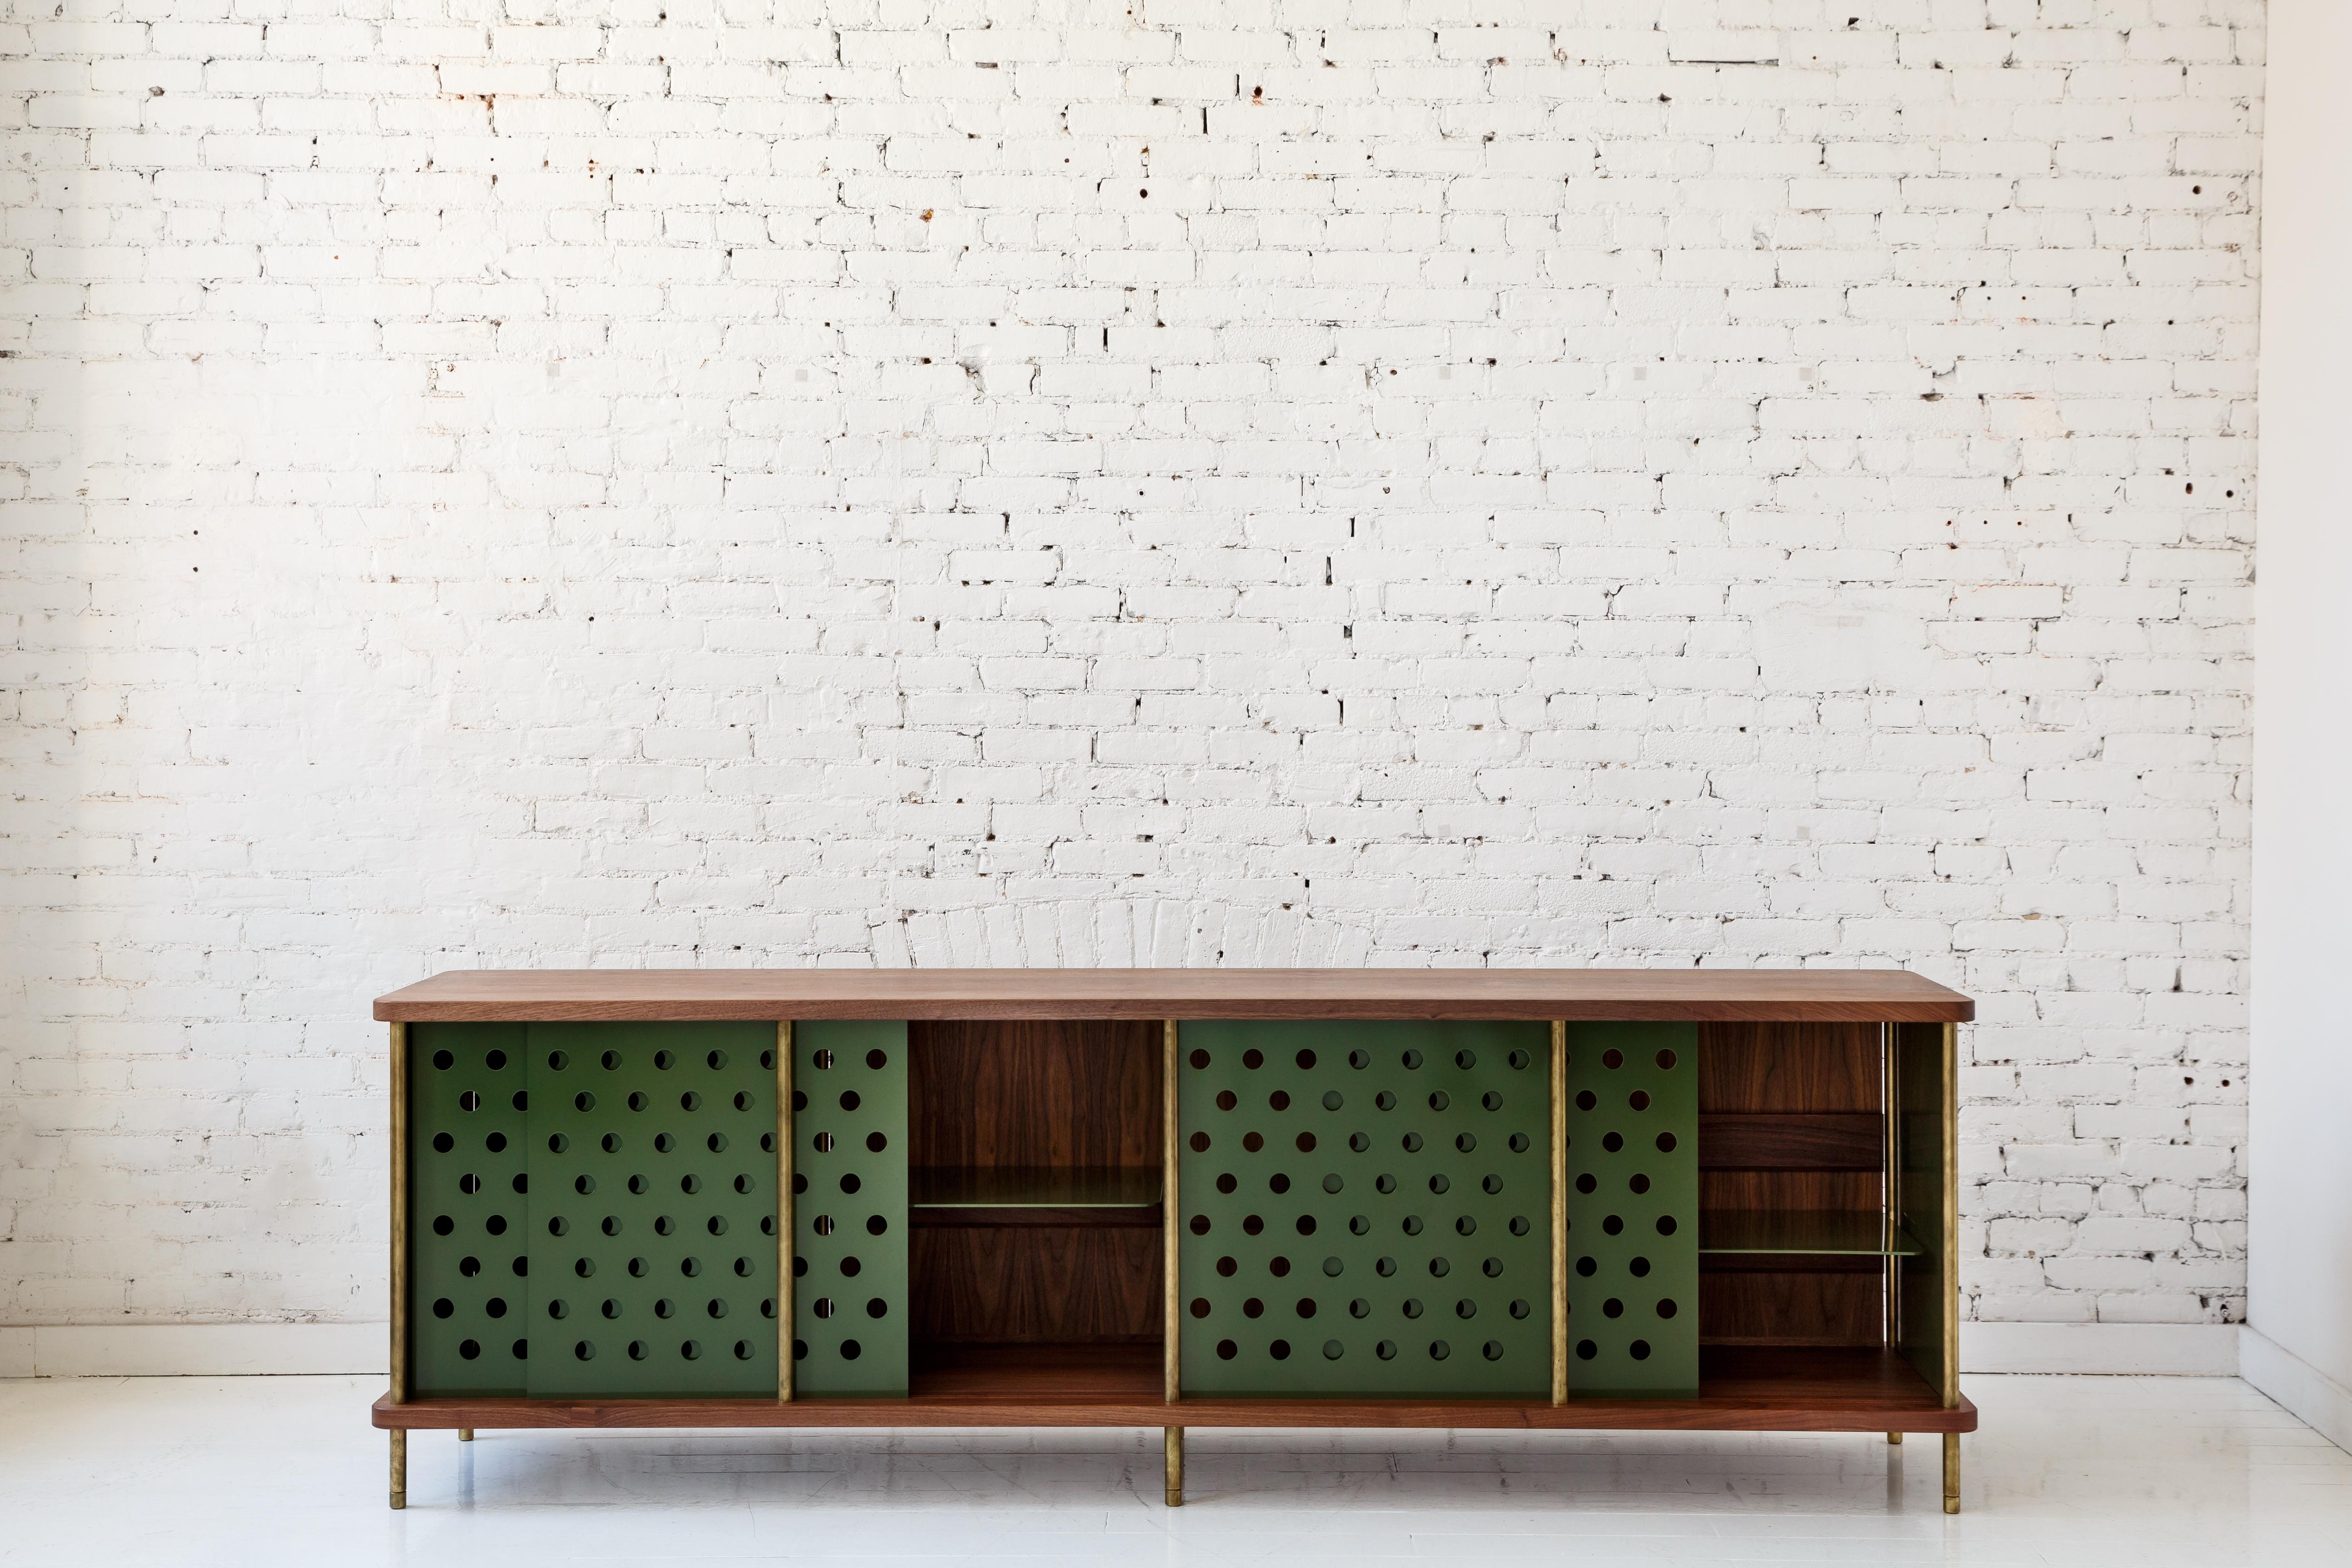 American 4 Door Strata Credenza with No Top Shelves in Walnut and Brass by Fort Standard